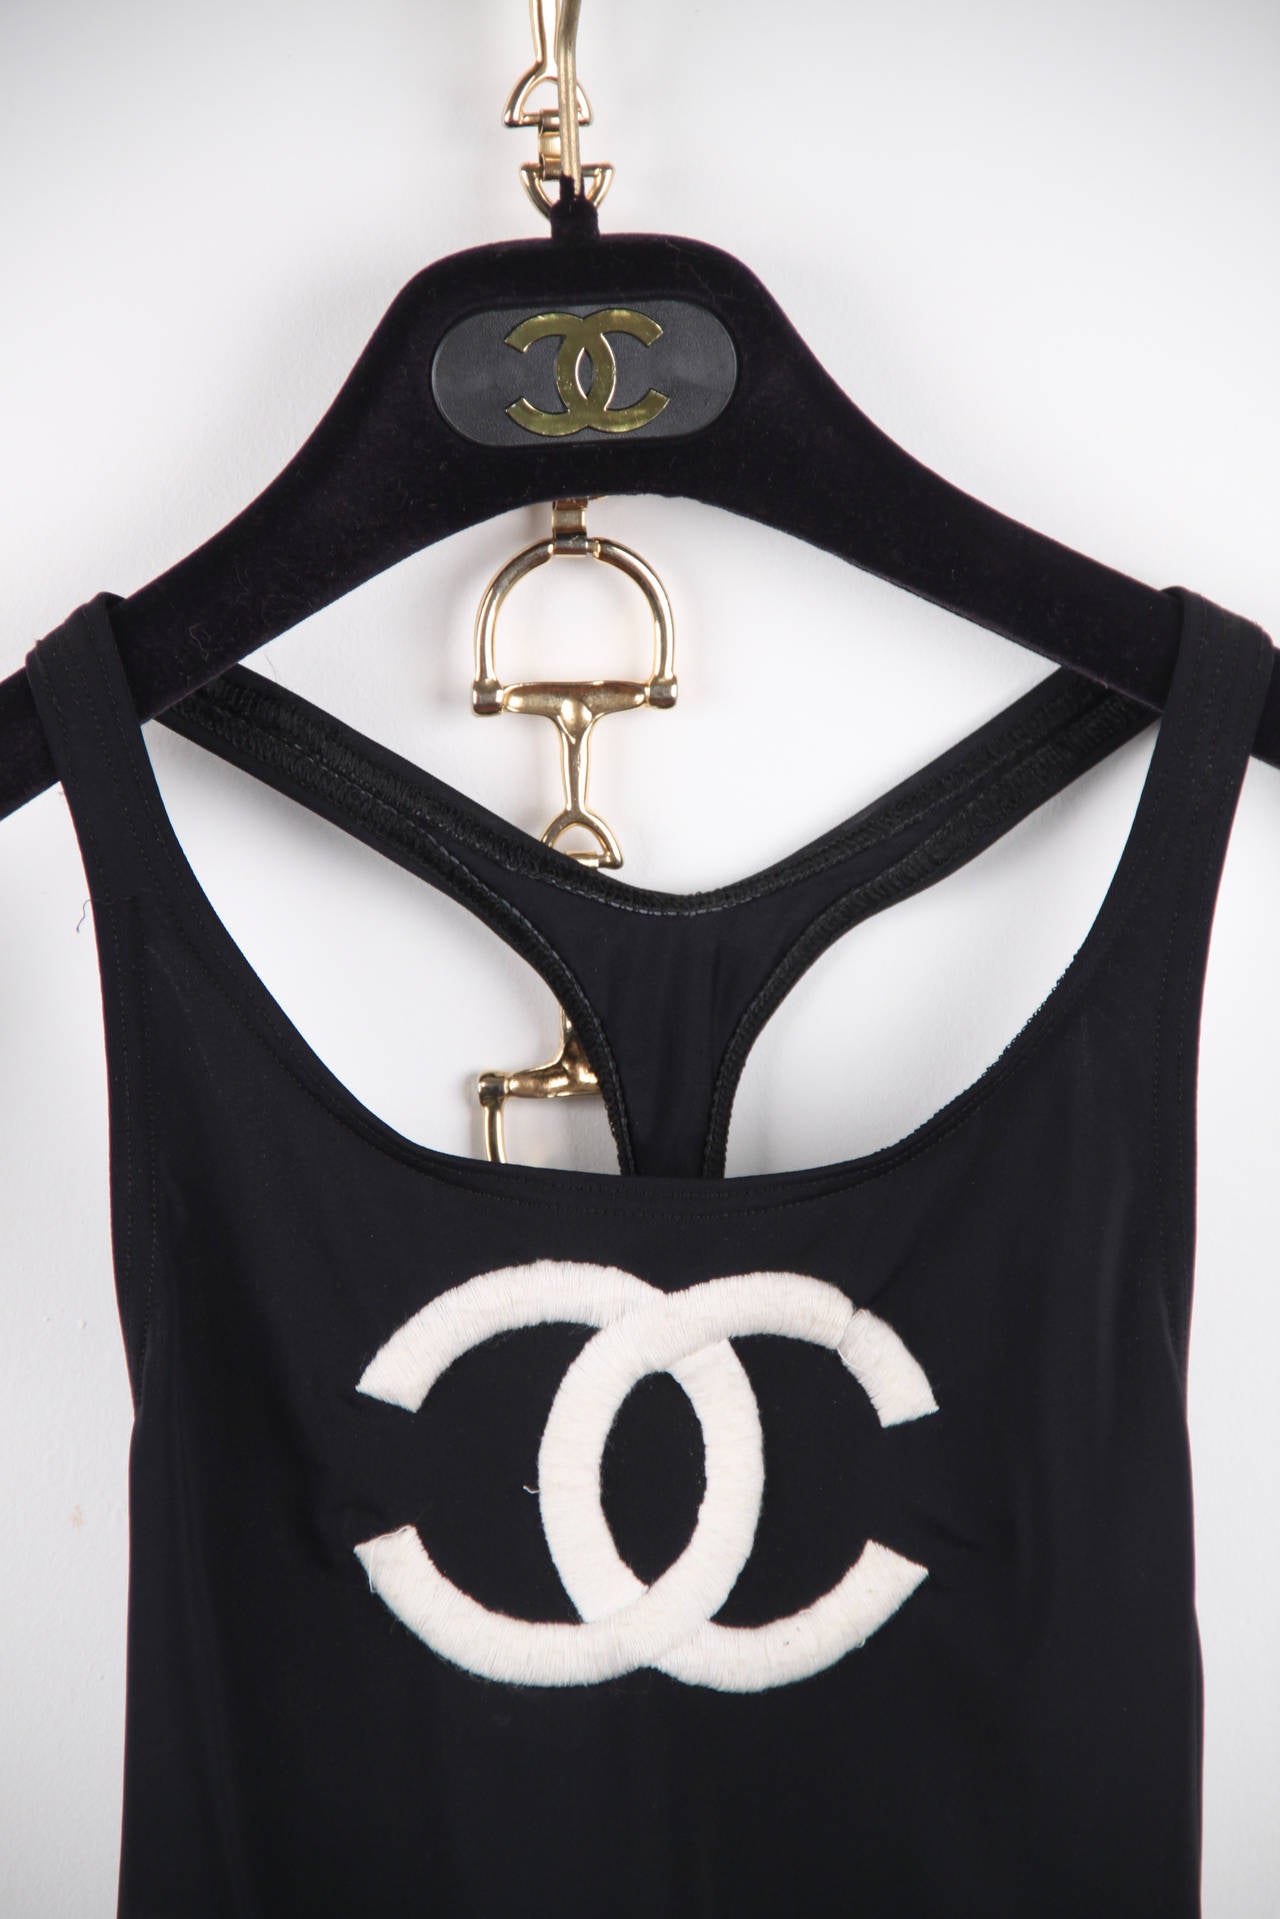 - Stretch swim fabric (80% Nylon - 20% Elastane)

- CC - CHANEL logo embroidered on the front

- Racer cut

- 38 (The size shown for this item is the size indicated by the designer on the label) It should correspond to a SMALL size

Logos /